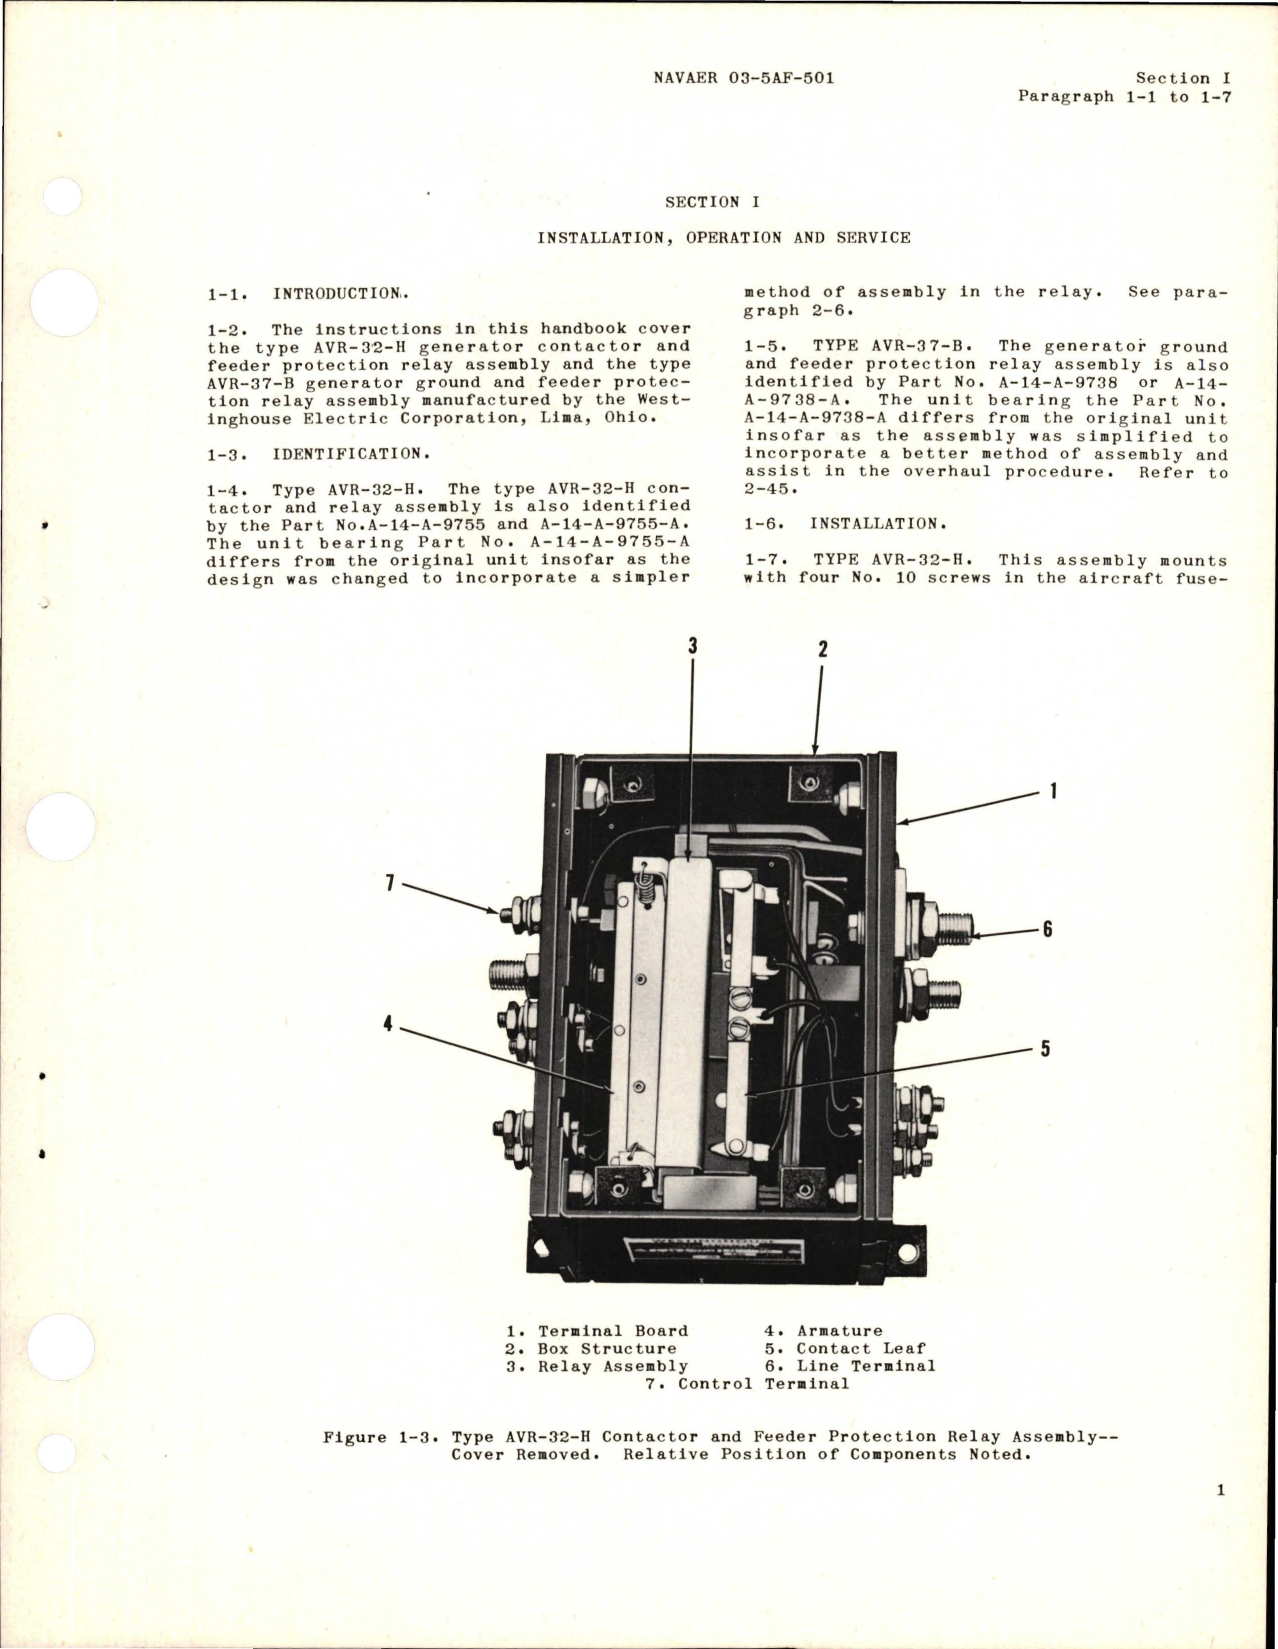 Sample page 5 from AirCorps Library document: Operation, Service and Overhaul Instructions with Parts Catalog for Generator Contactor and Feeder Protection Relay Assembly